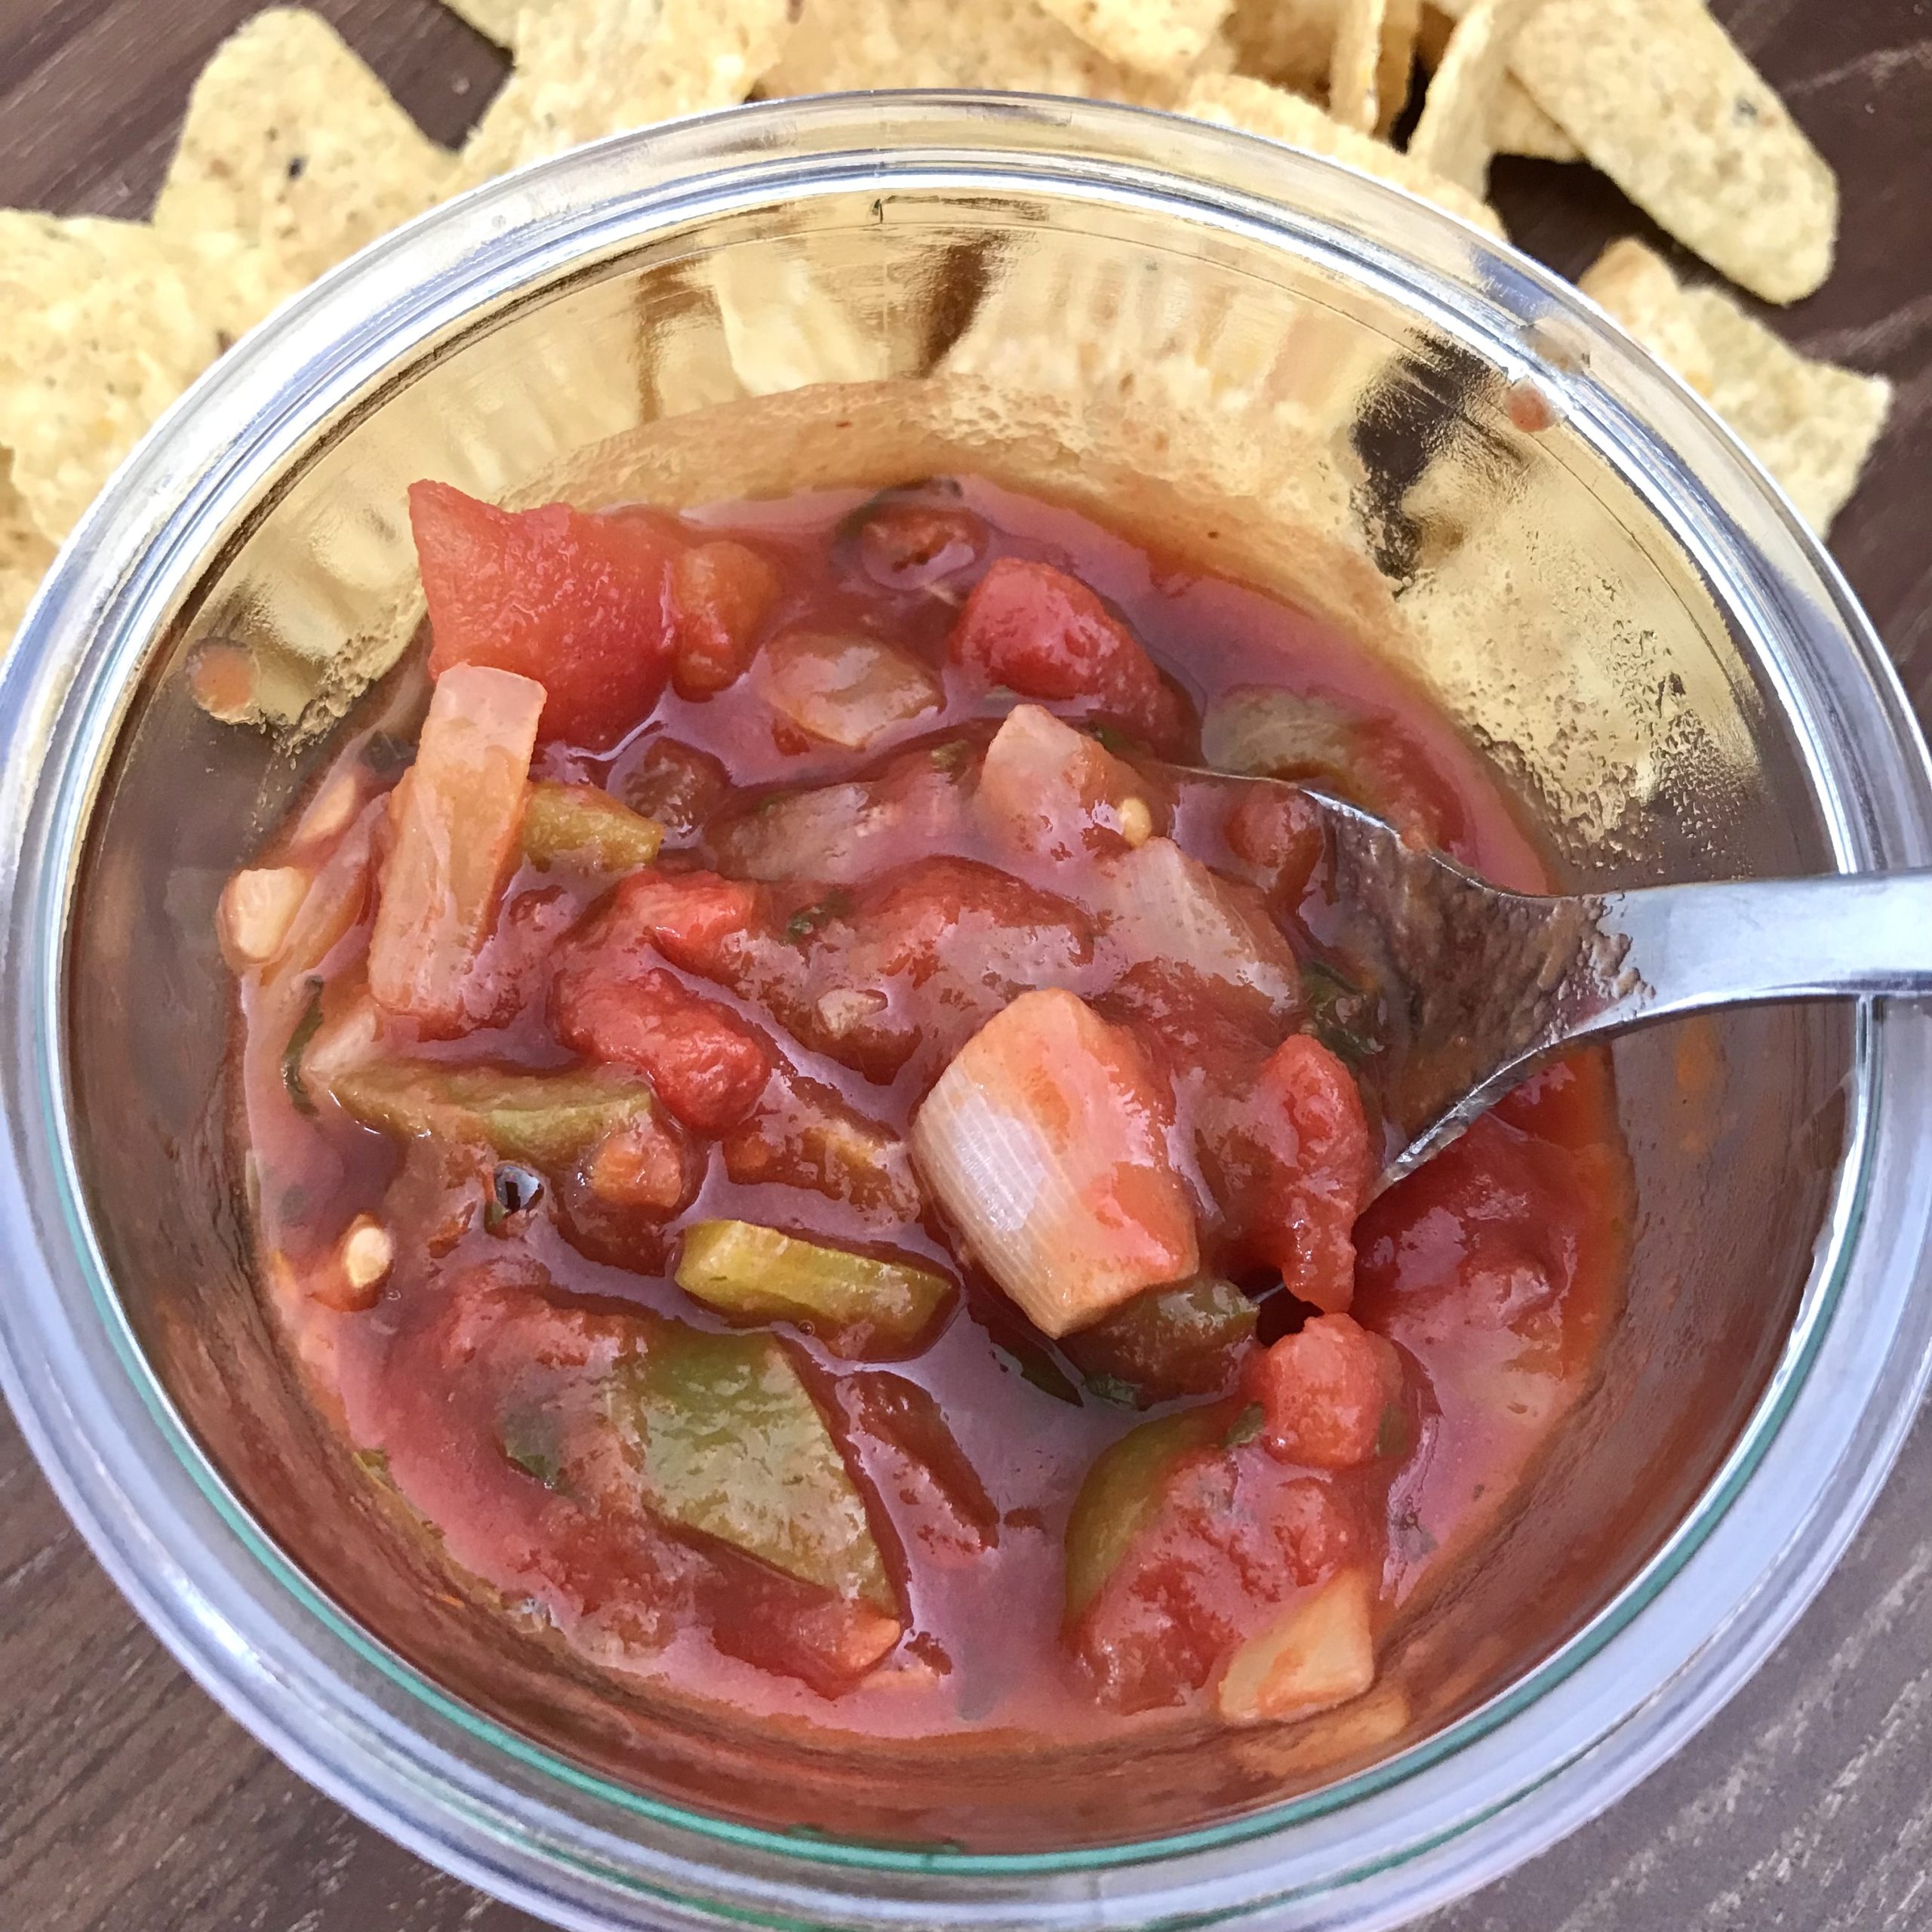 Salsa Recipe for Home Canning {This Tastes Just Like Costco Salsa!}